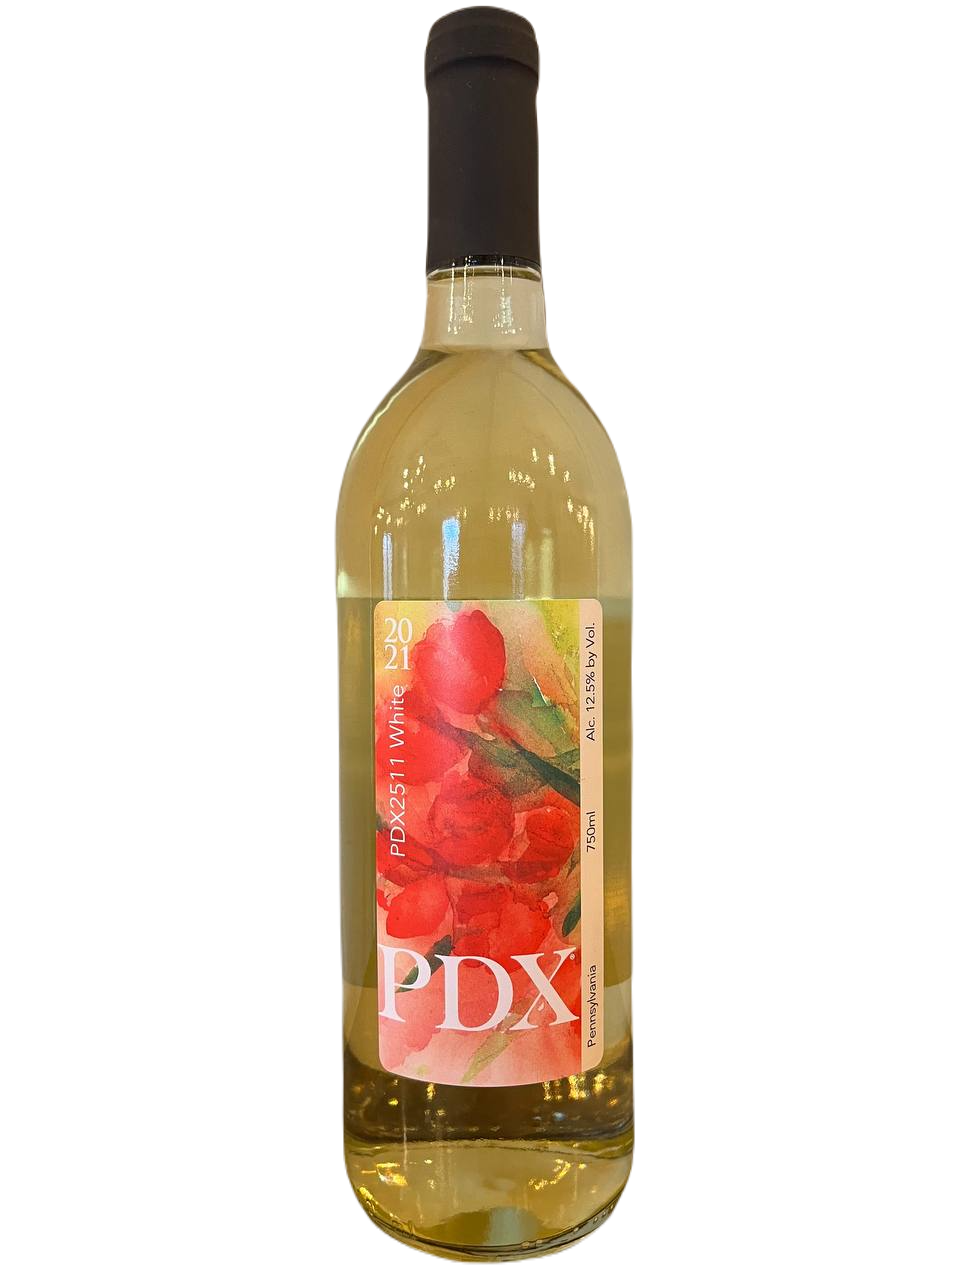 Product Image for PDX 2511 White Bottle